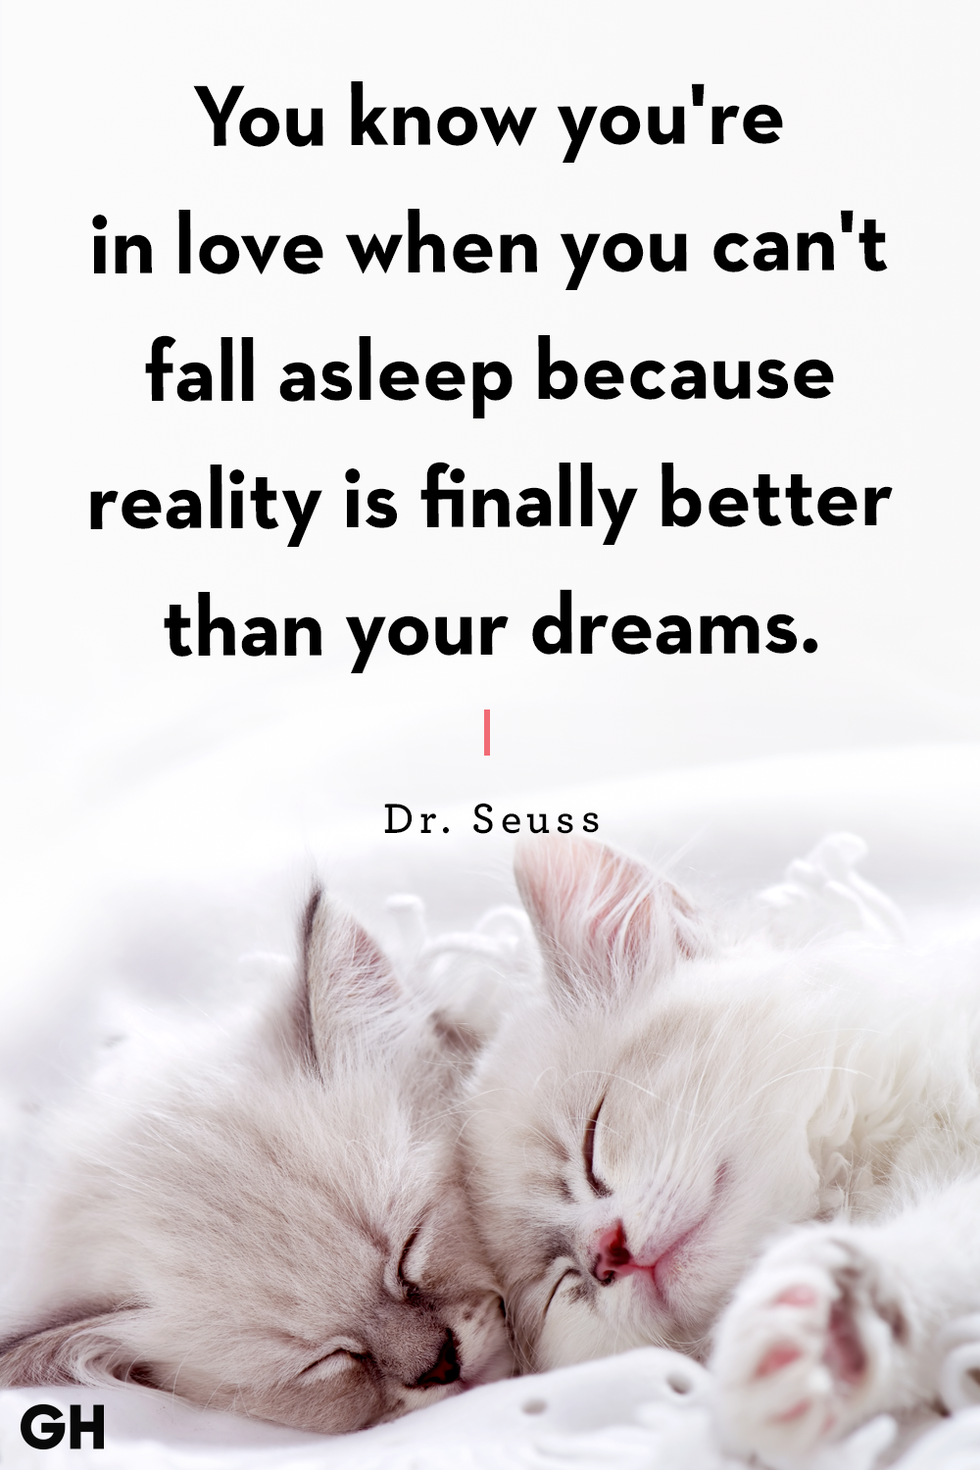 20 Sleep Quotes - Cute Good Night Quotes